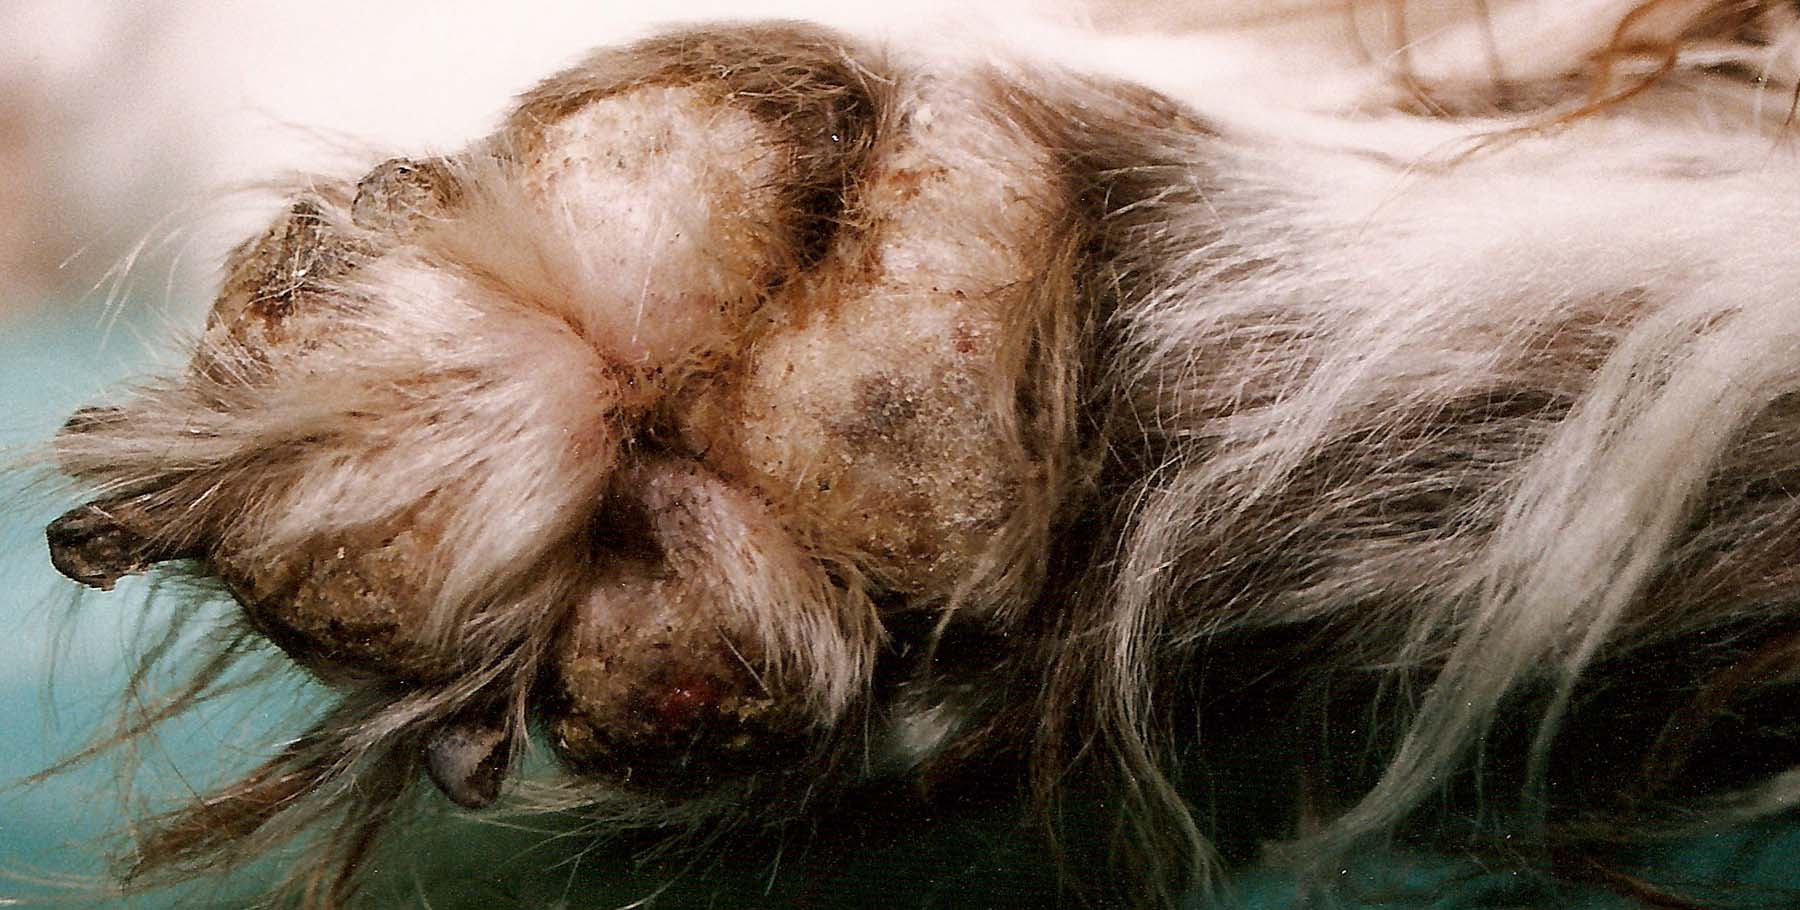 Rare Canine Necrolytic Migratory Erythema (Hepatocutaneous Syndrome): Early Pad Lesions